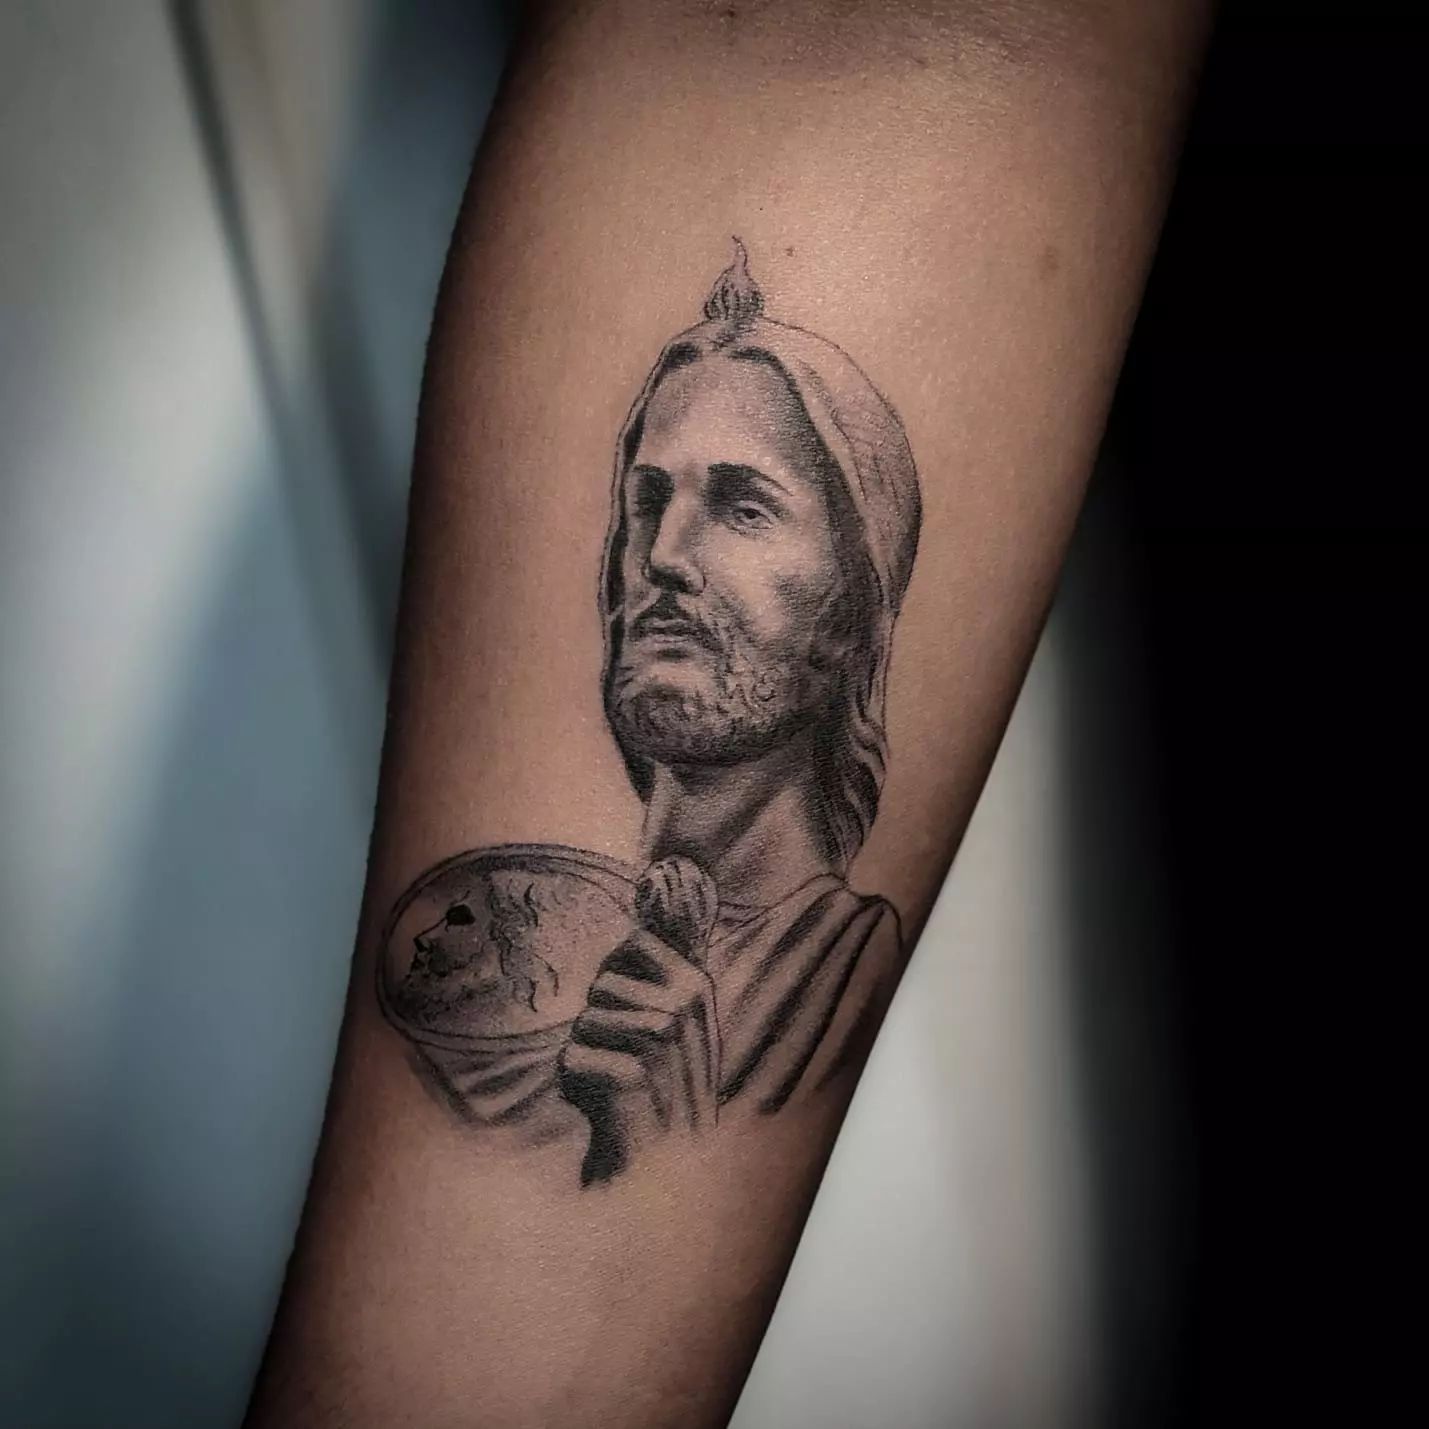 Jorge Corcuera on Instagram San Judas to finish off his sleeve  Text  6262576943 for appointments sanjudas sanjudastattoo tattoo tattoos  westcovina covina 